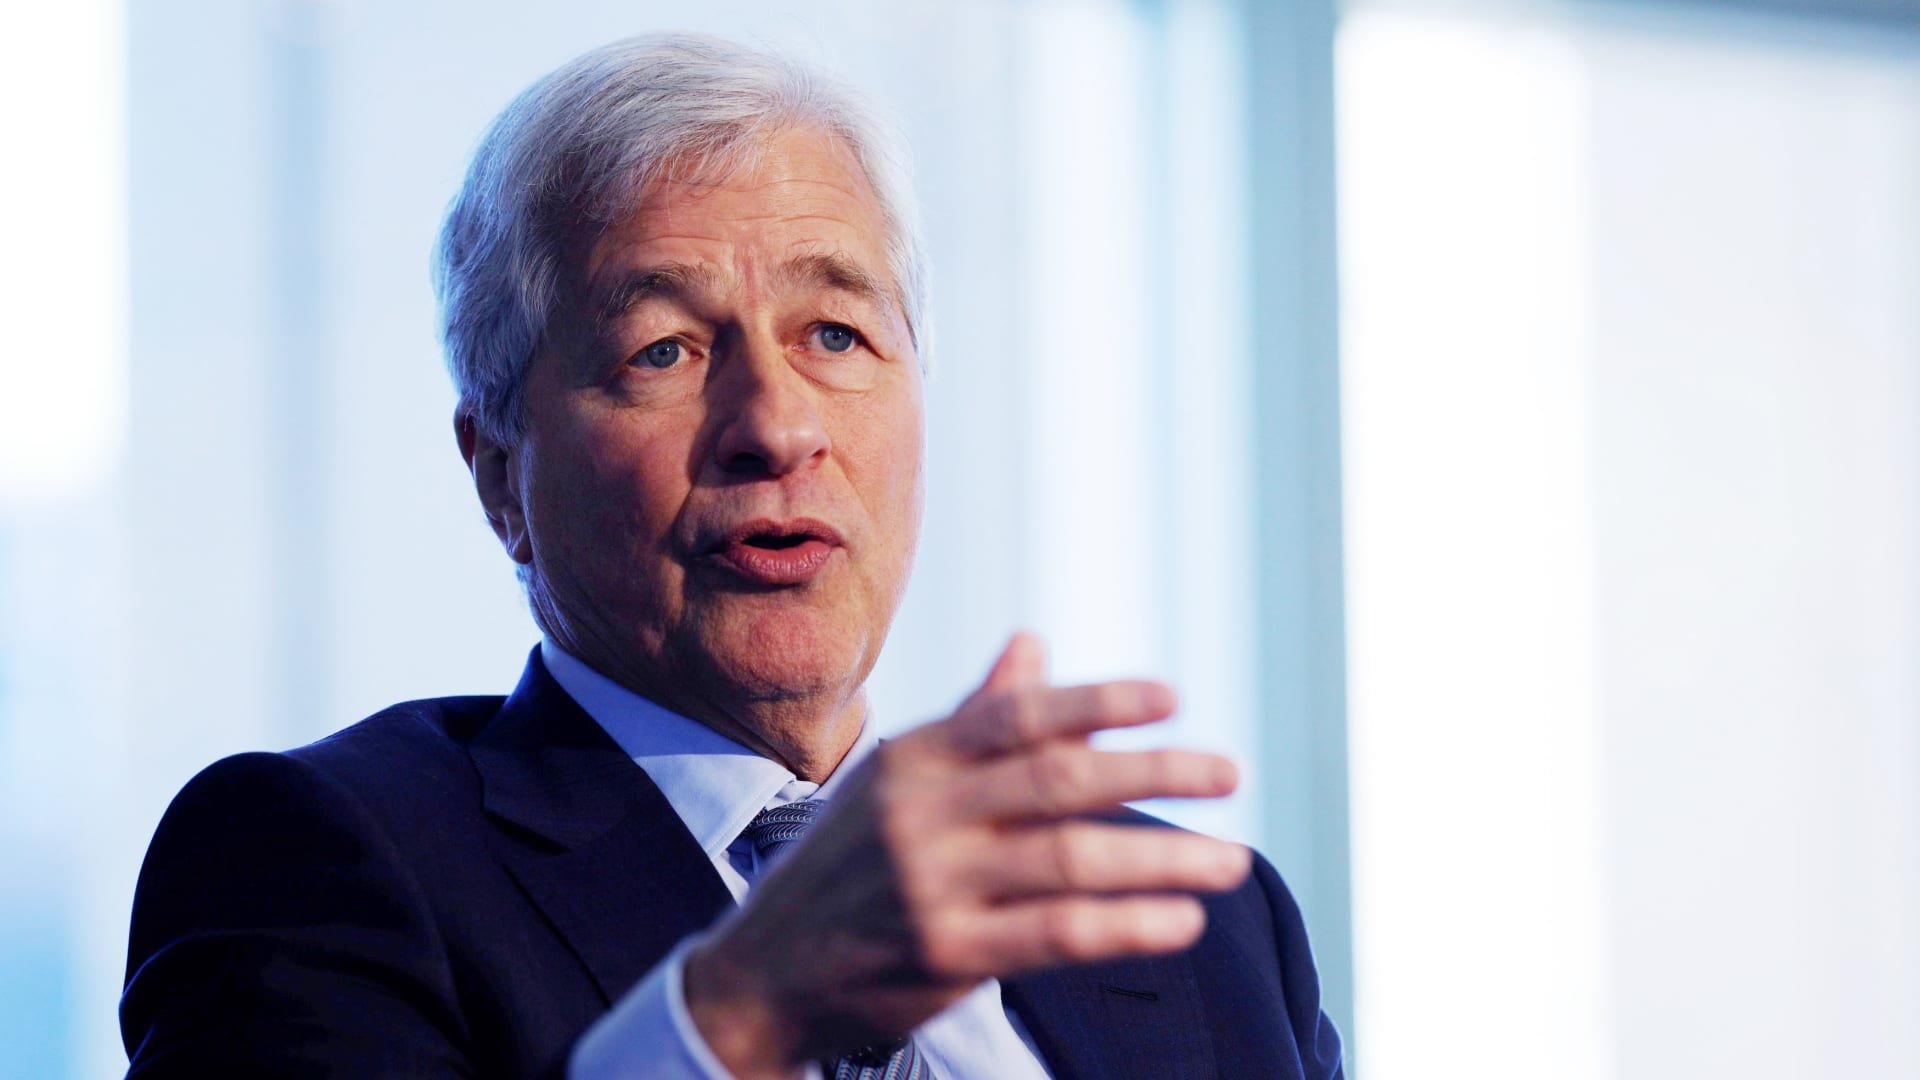 JPMorgan Chase tells employees the bank will pay for travel to states that allow abortion